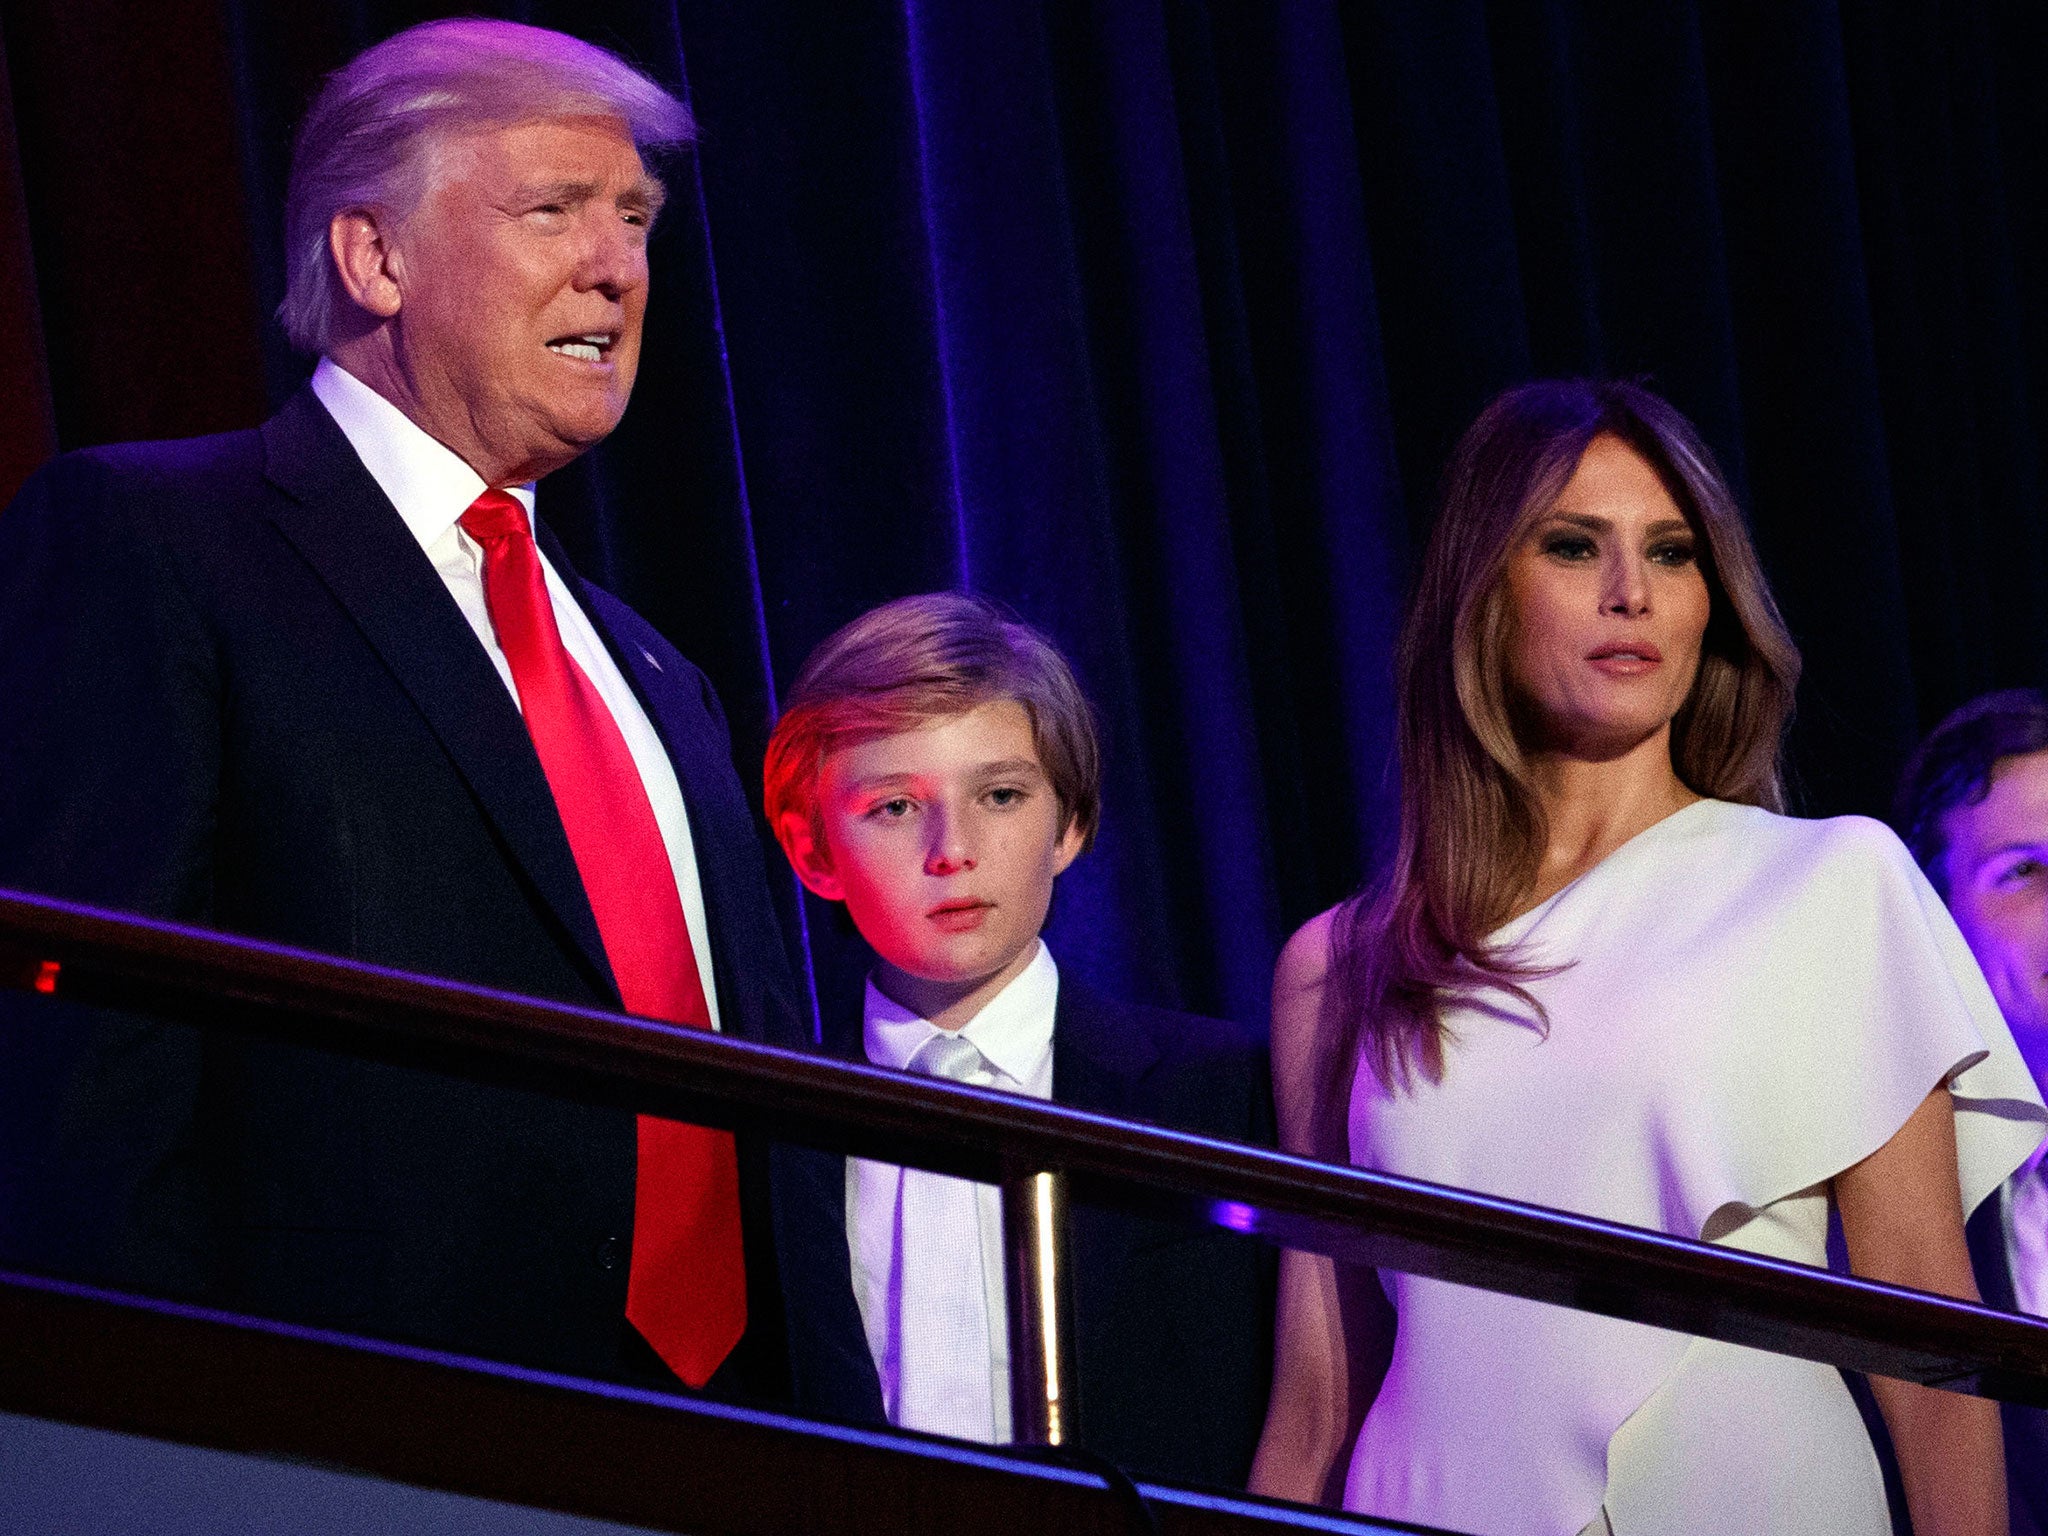 President-elect Donald Trump, left, arrives to speak at an election night rally with his son Barron and wife Melania, in New York.